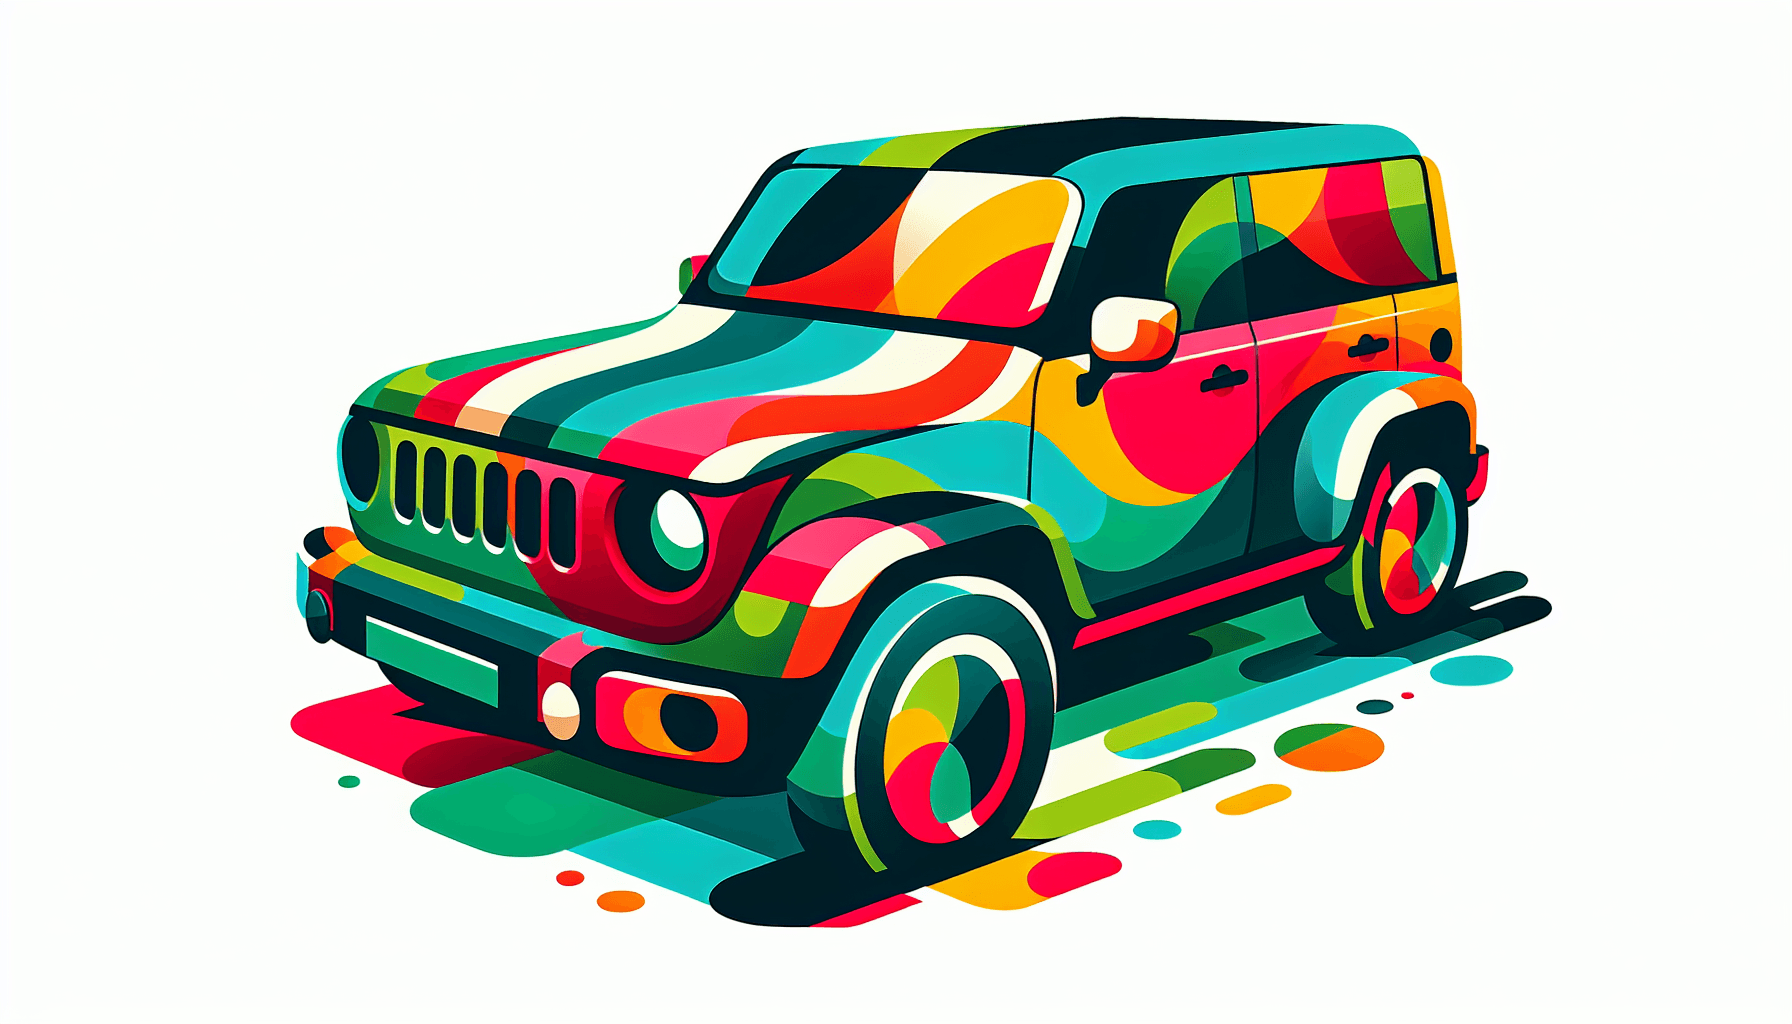 Automobile in flat illustration style and white background, red #f47574, green #88c7a8, yellow #fcc44b, and blue #645bc8 colors.